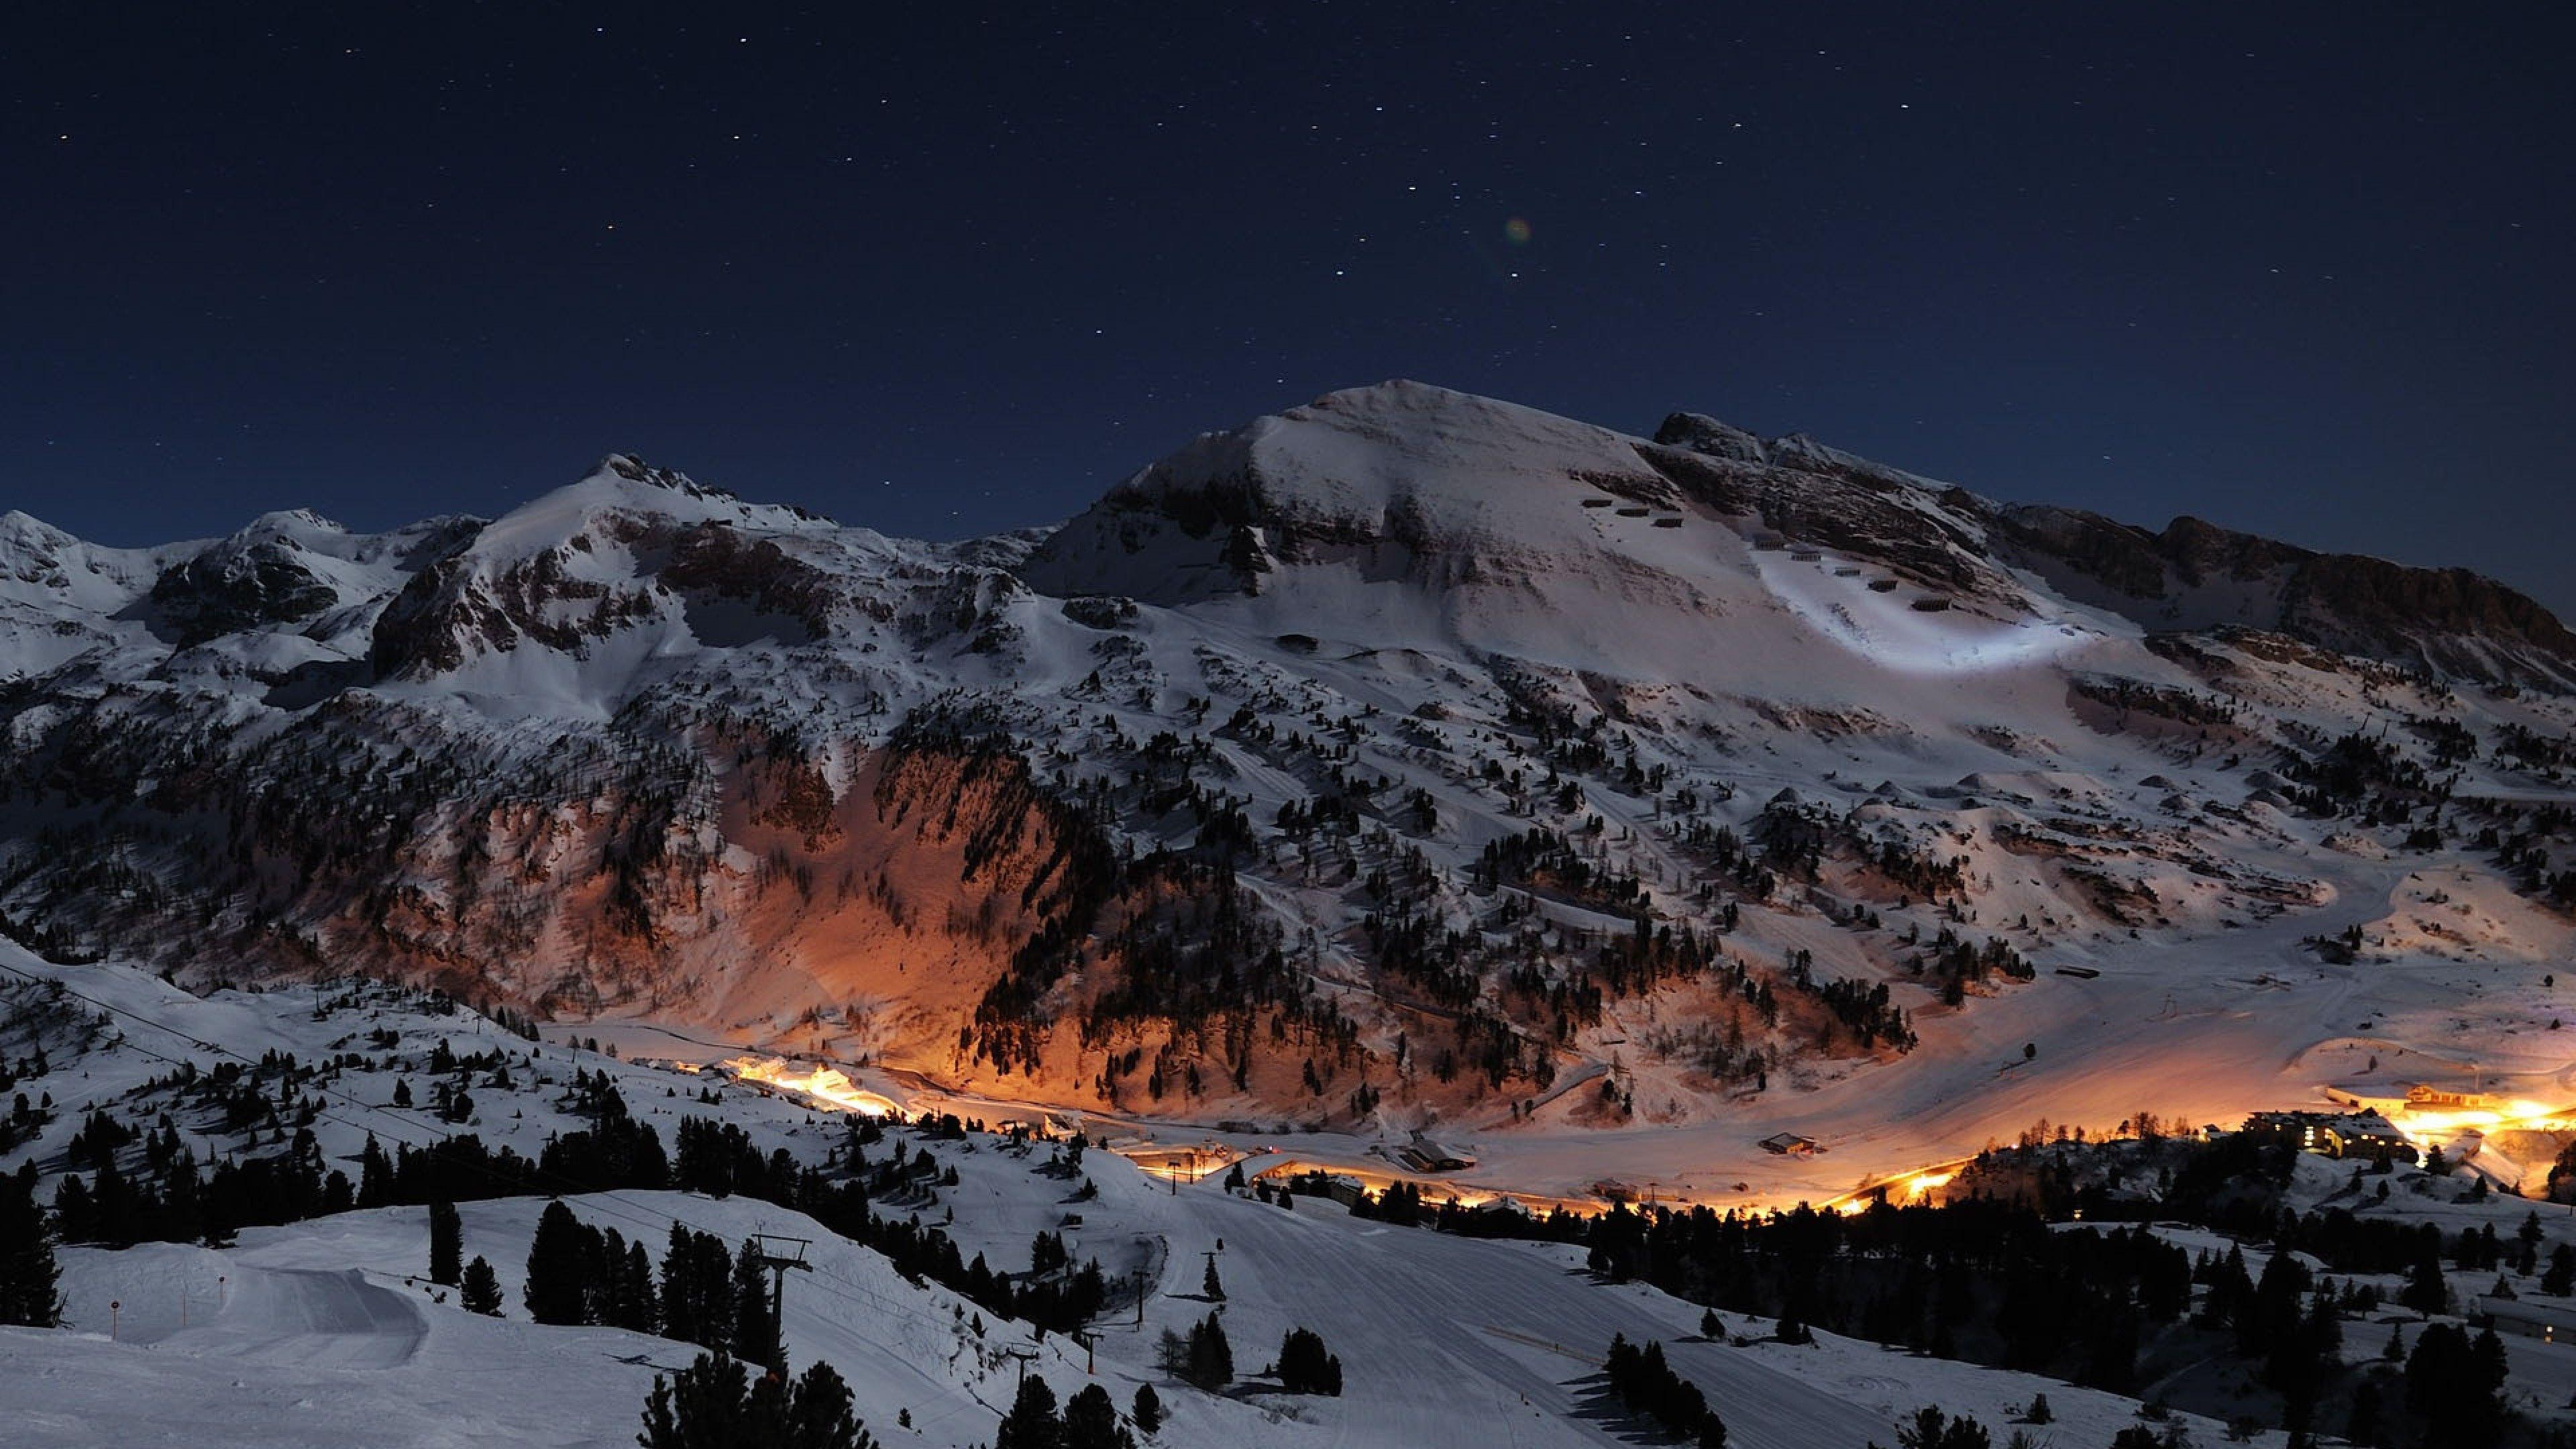 Night Star Alps. Mountain wallpaper, Mountains at night, Mountain picture